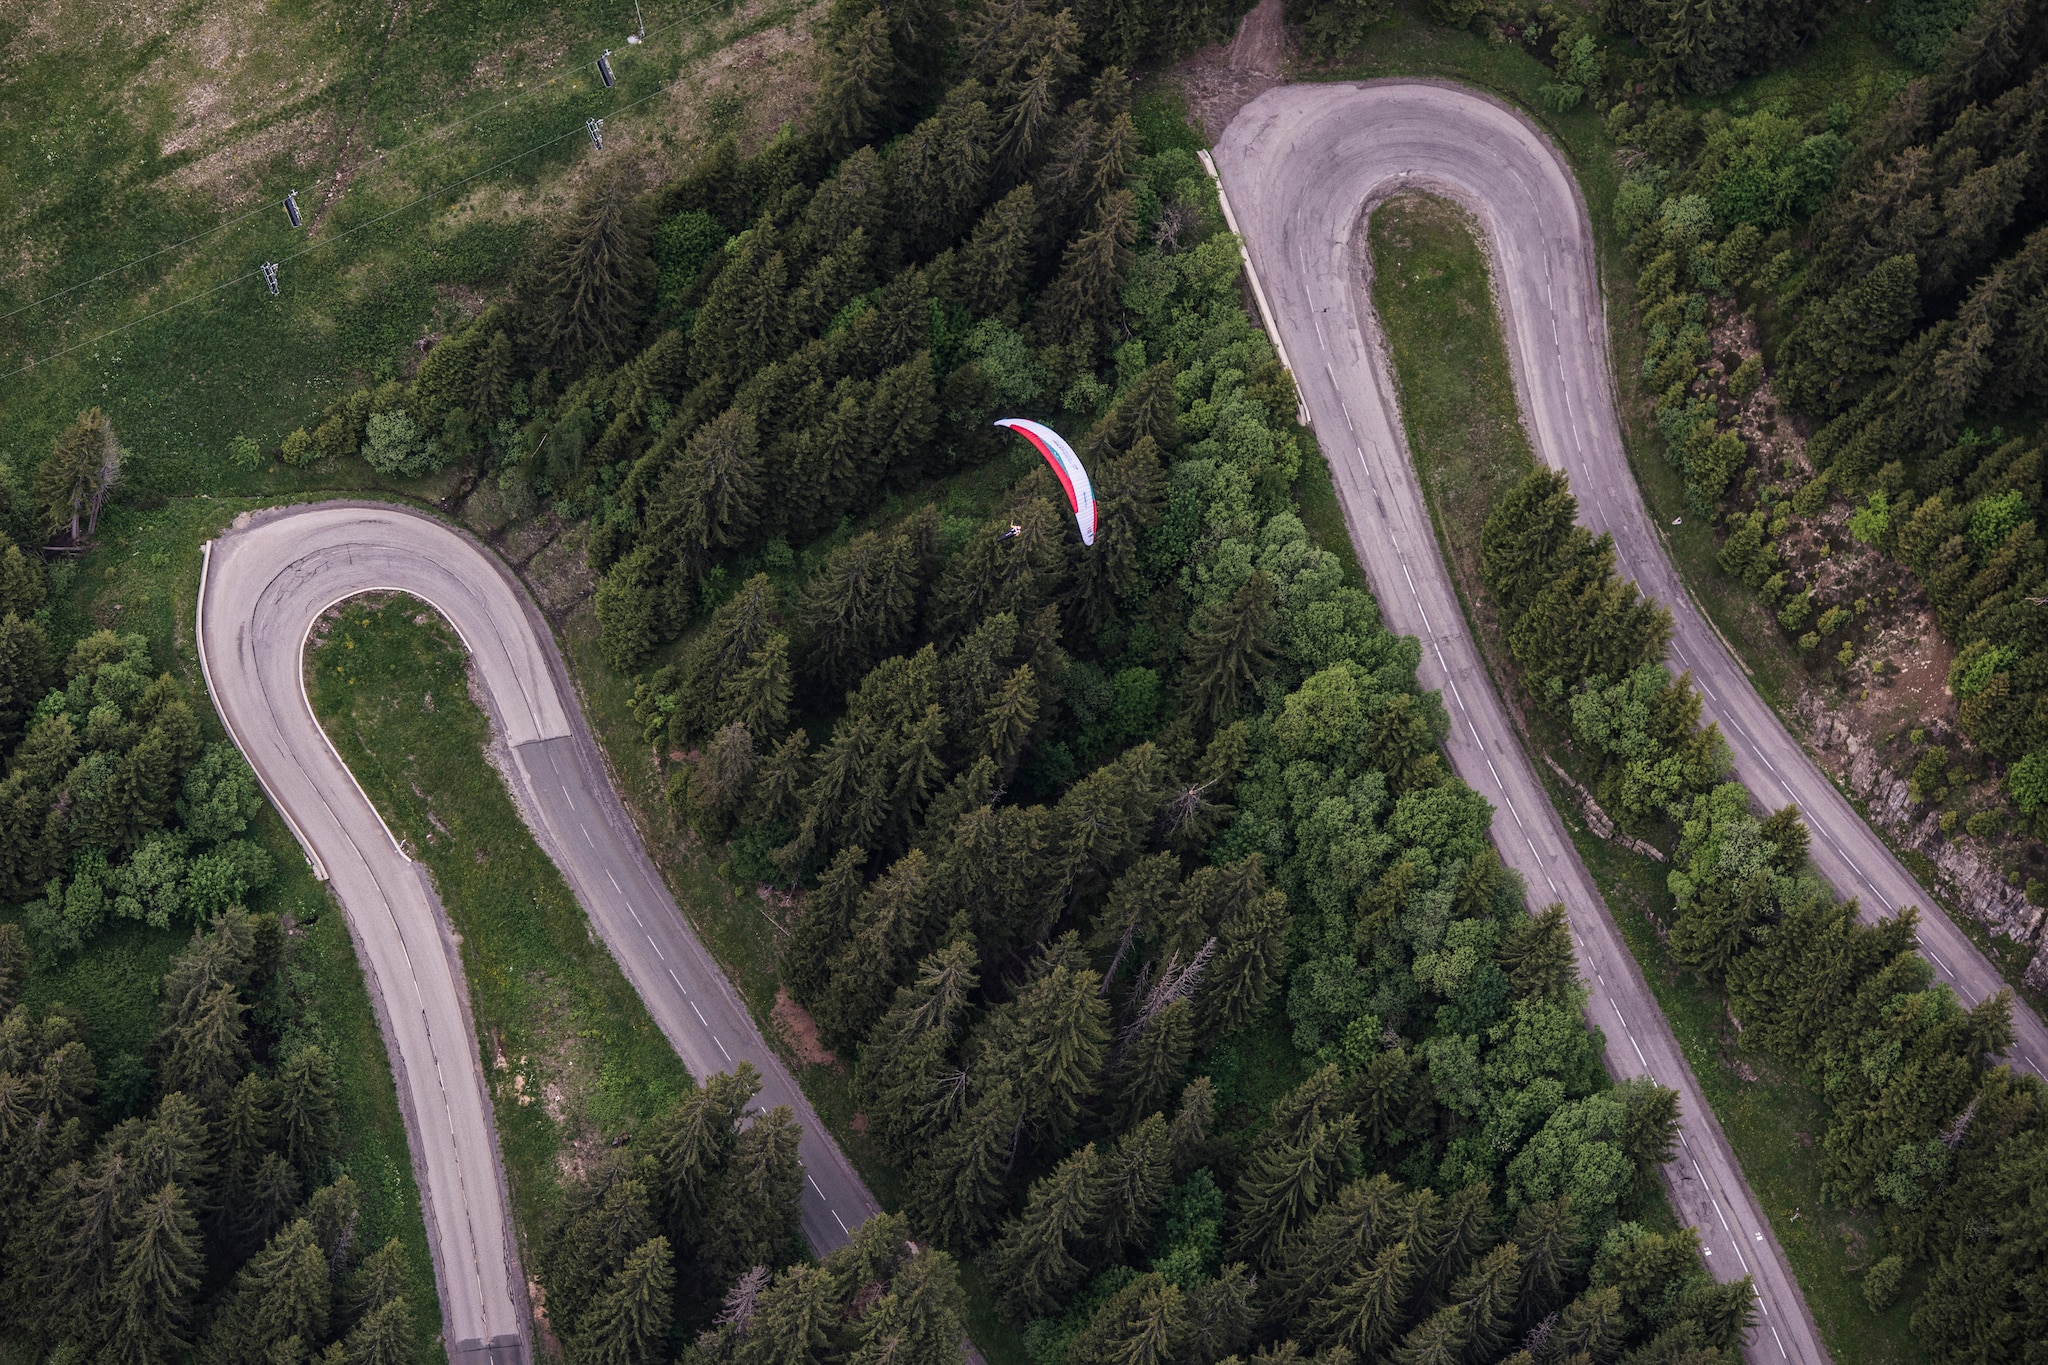 Christian Maurer (SUI1) races during the Red Bull X-Alps above Cluses, France  on June 21, 2019.